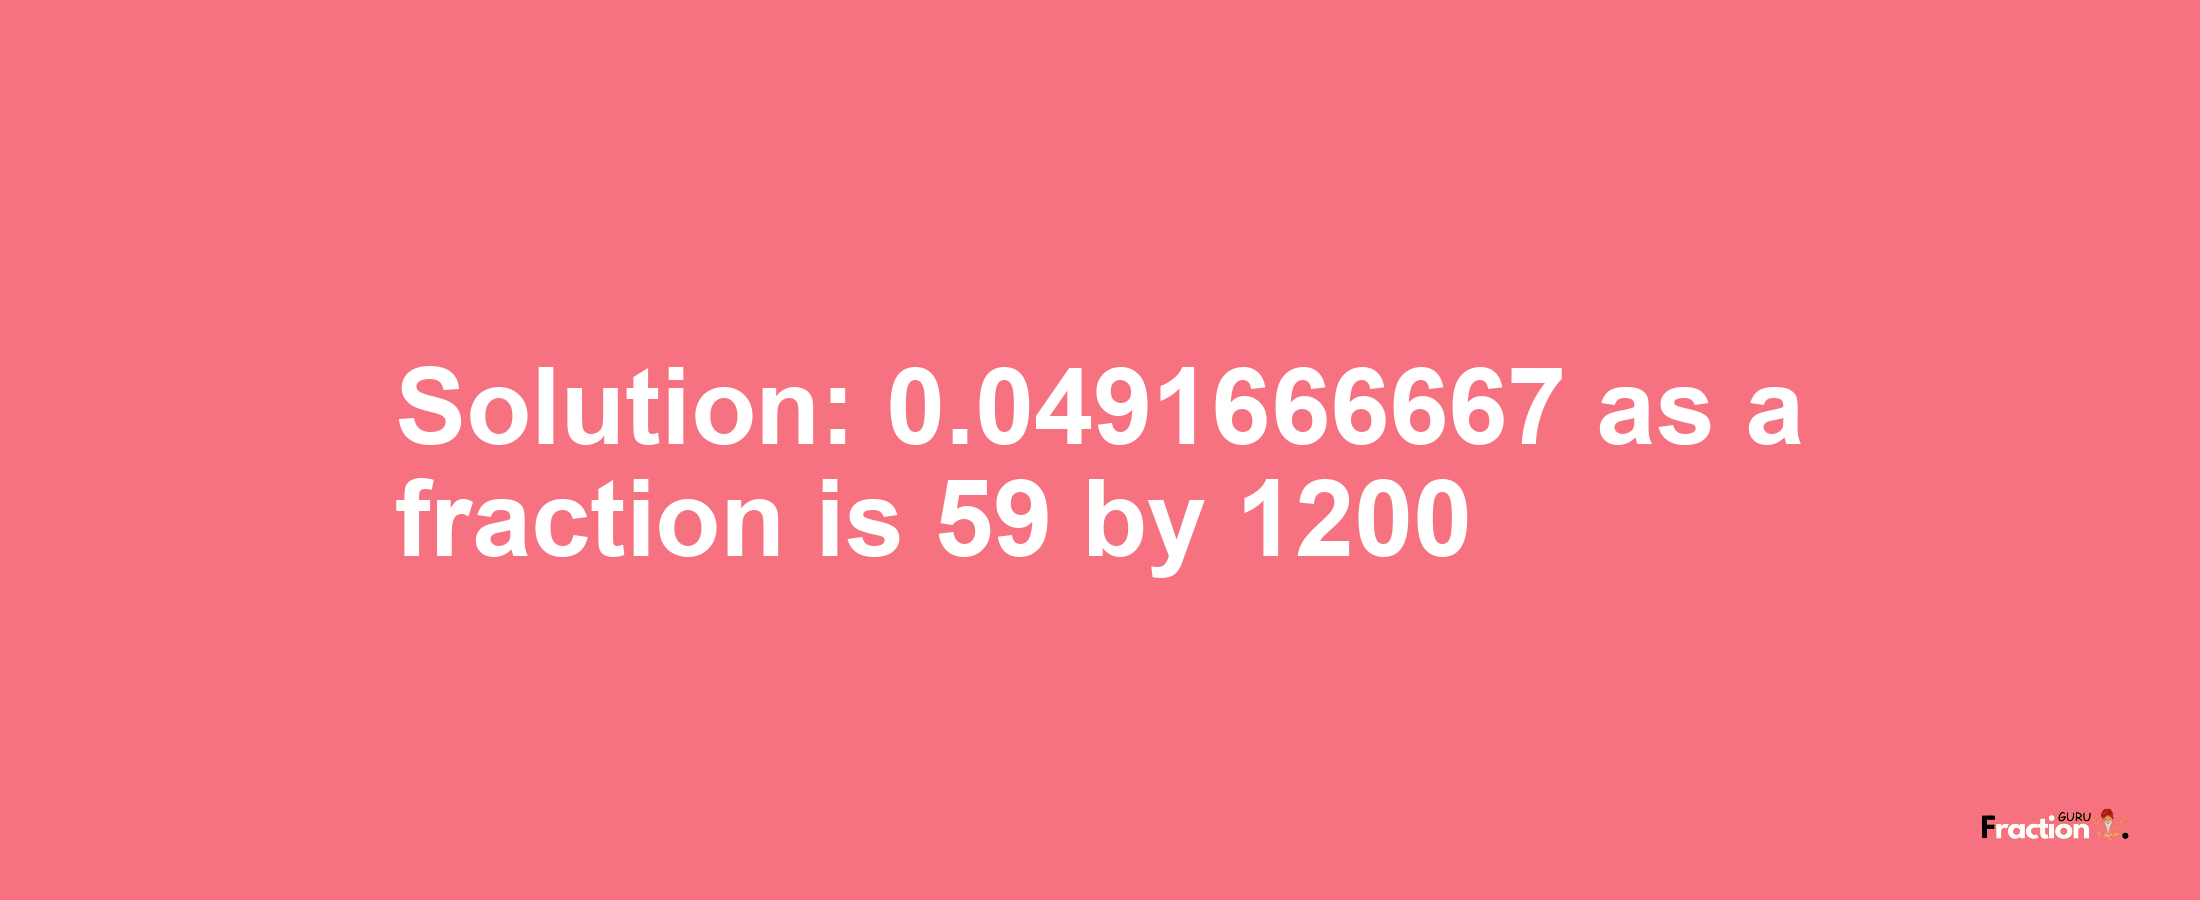 Solution:0.0491666667 as a fraction is 59/1200